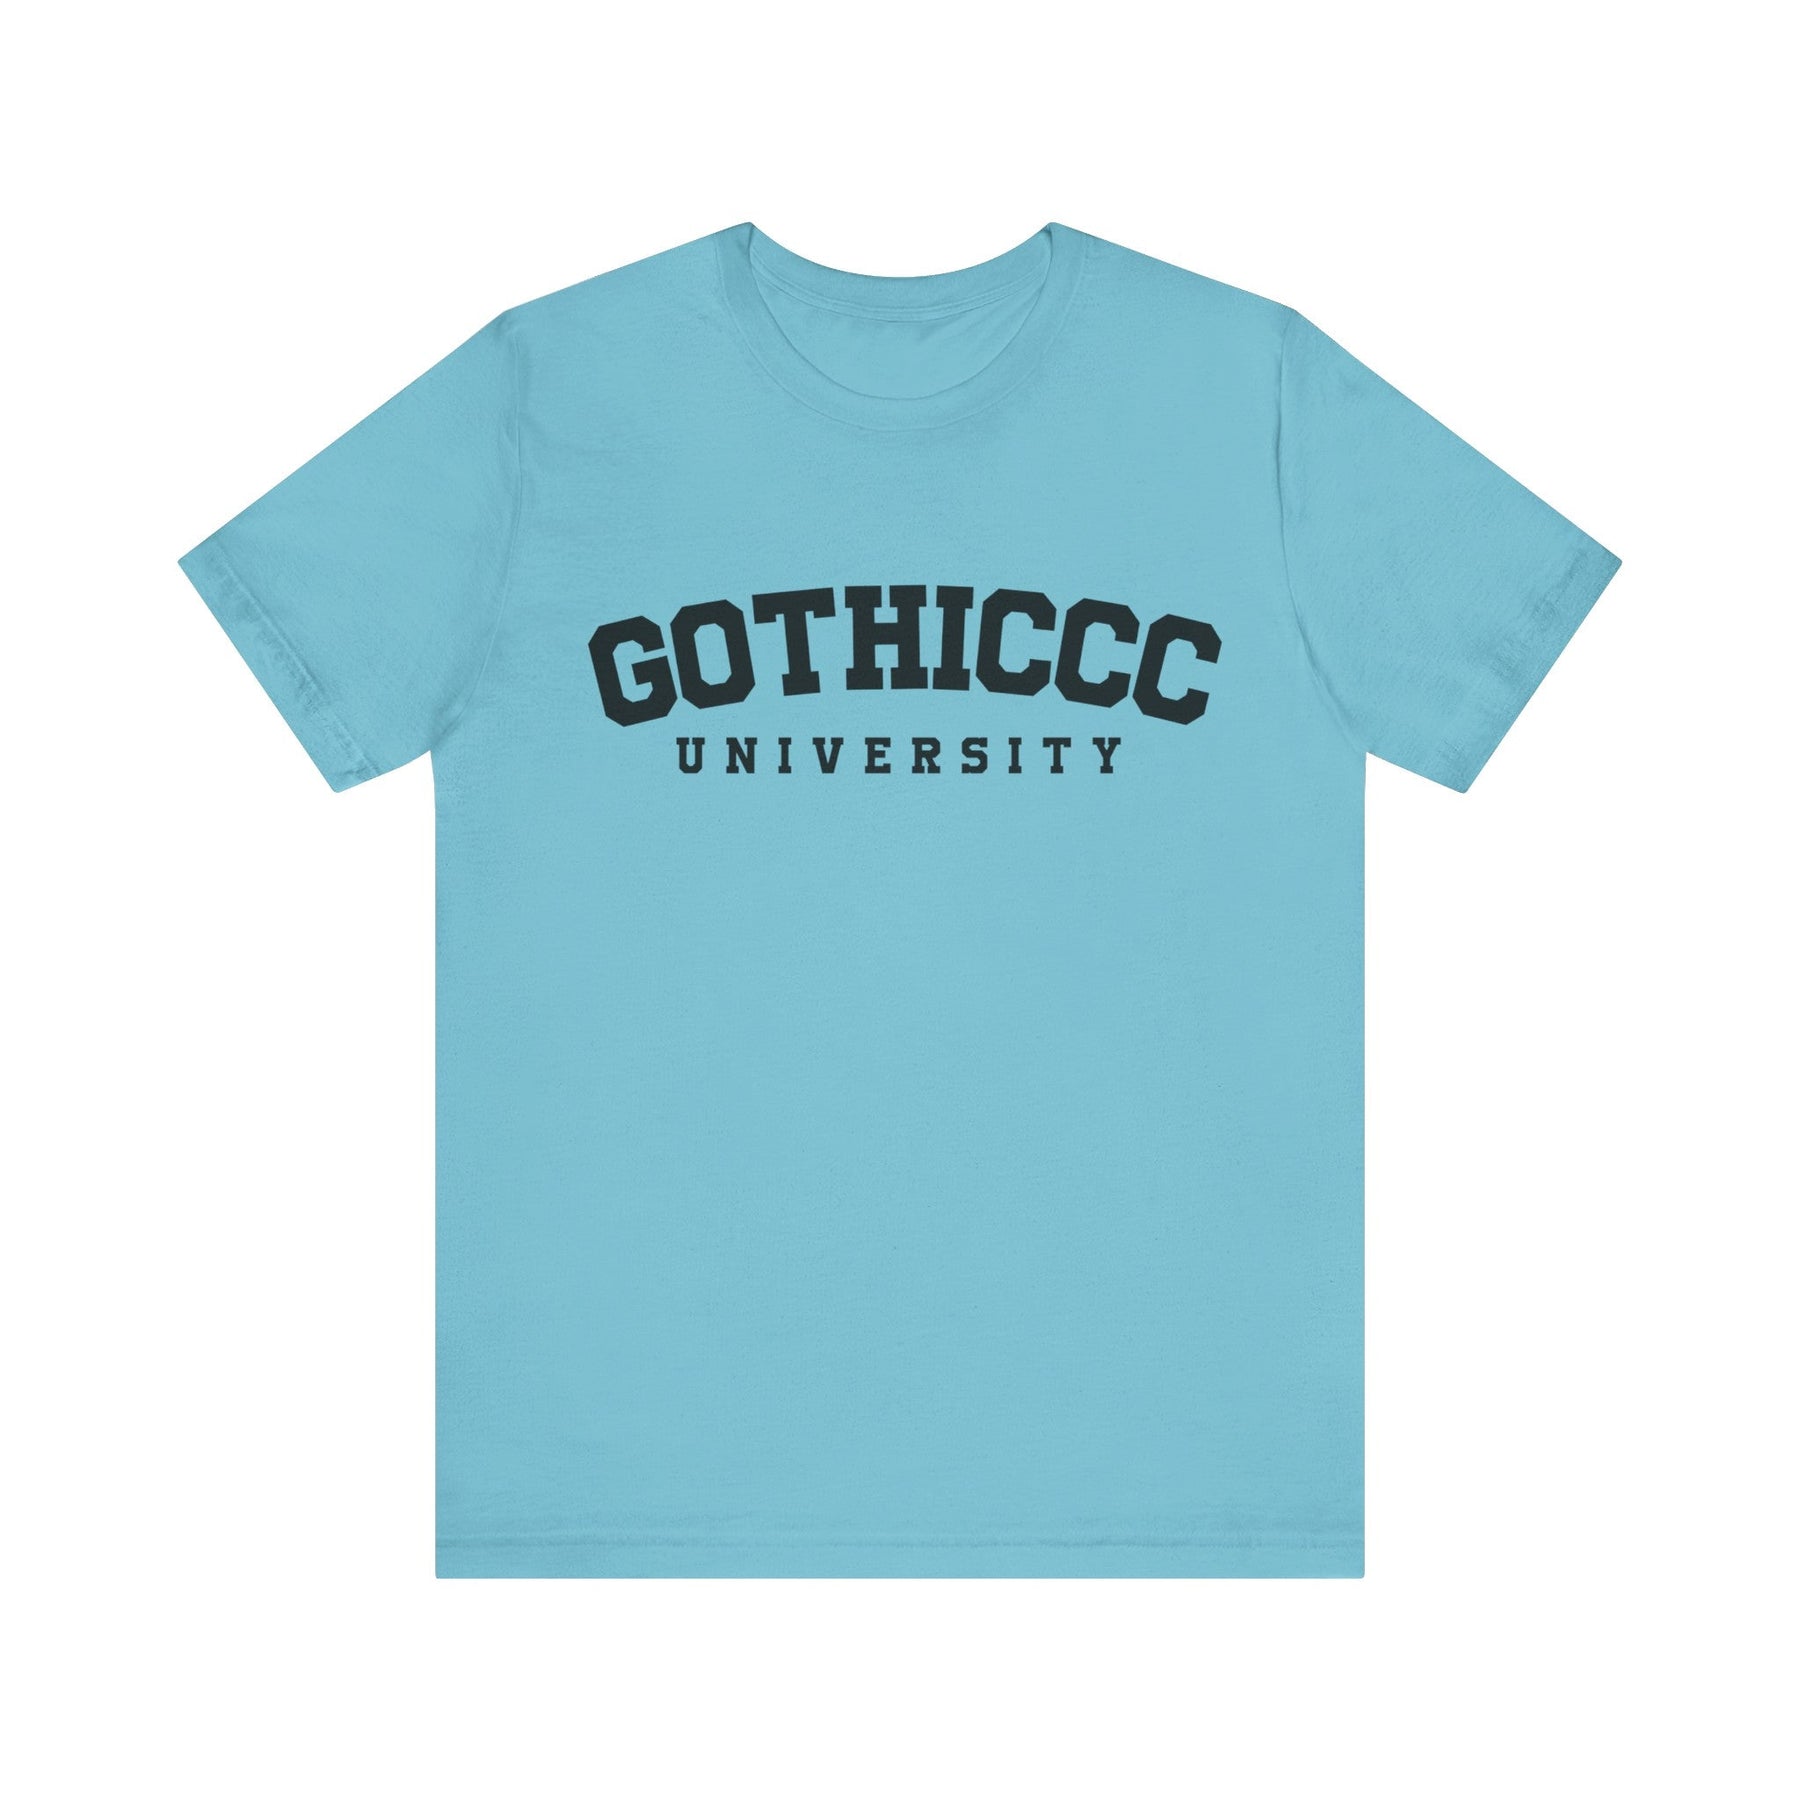 Gothiccc University Short Sleeve Tee - Goth Cloth Co.T - Shirt23251615756722956865